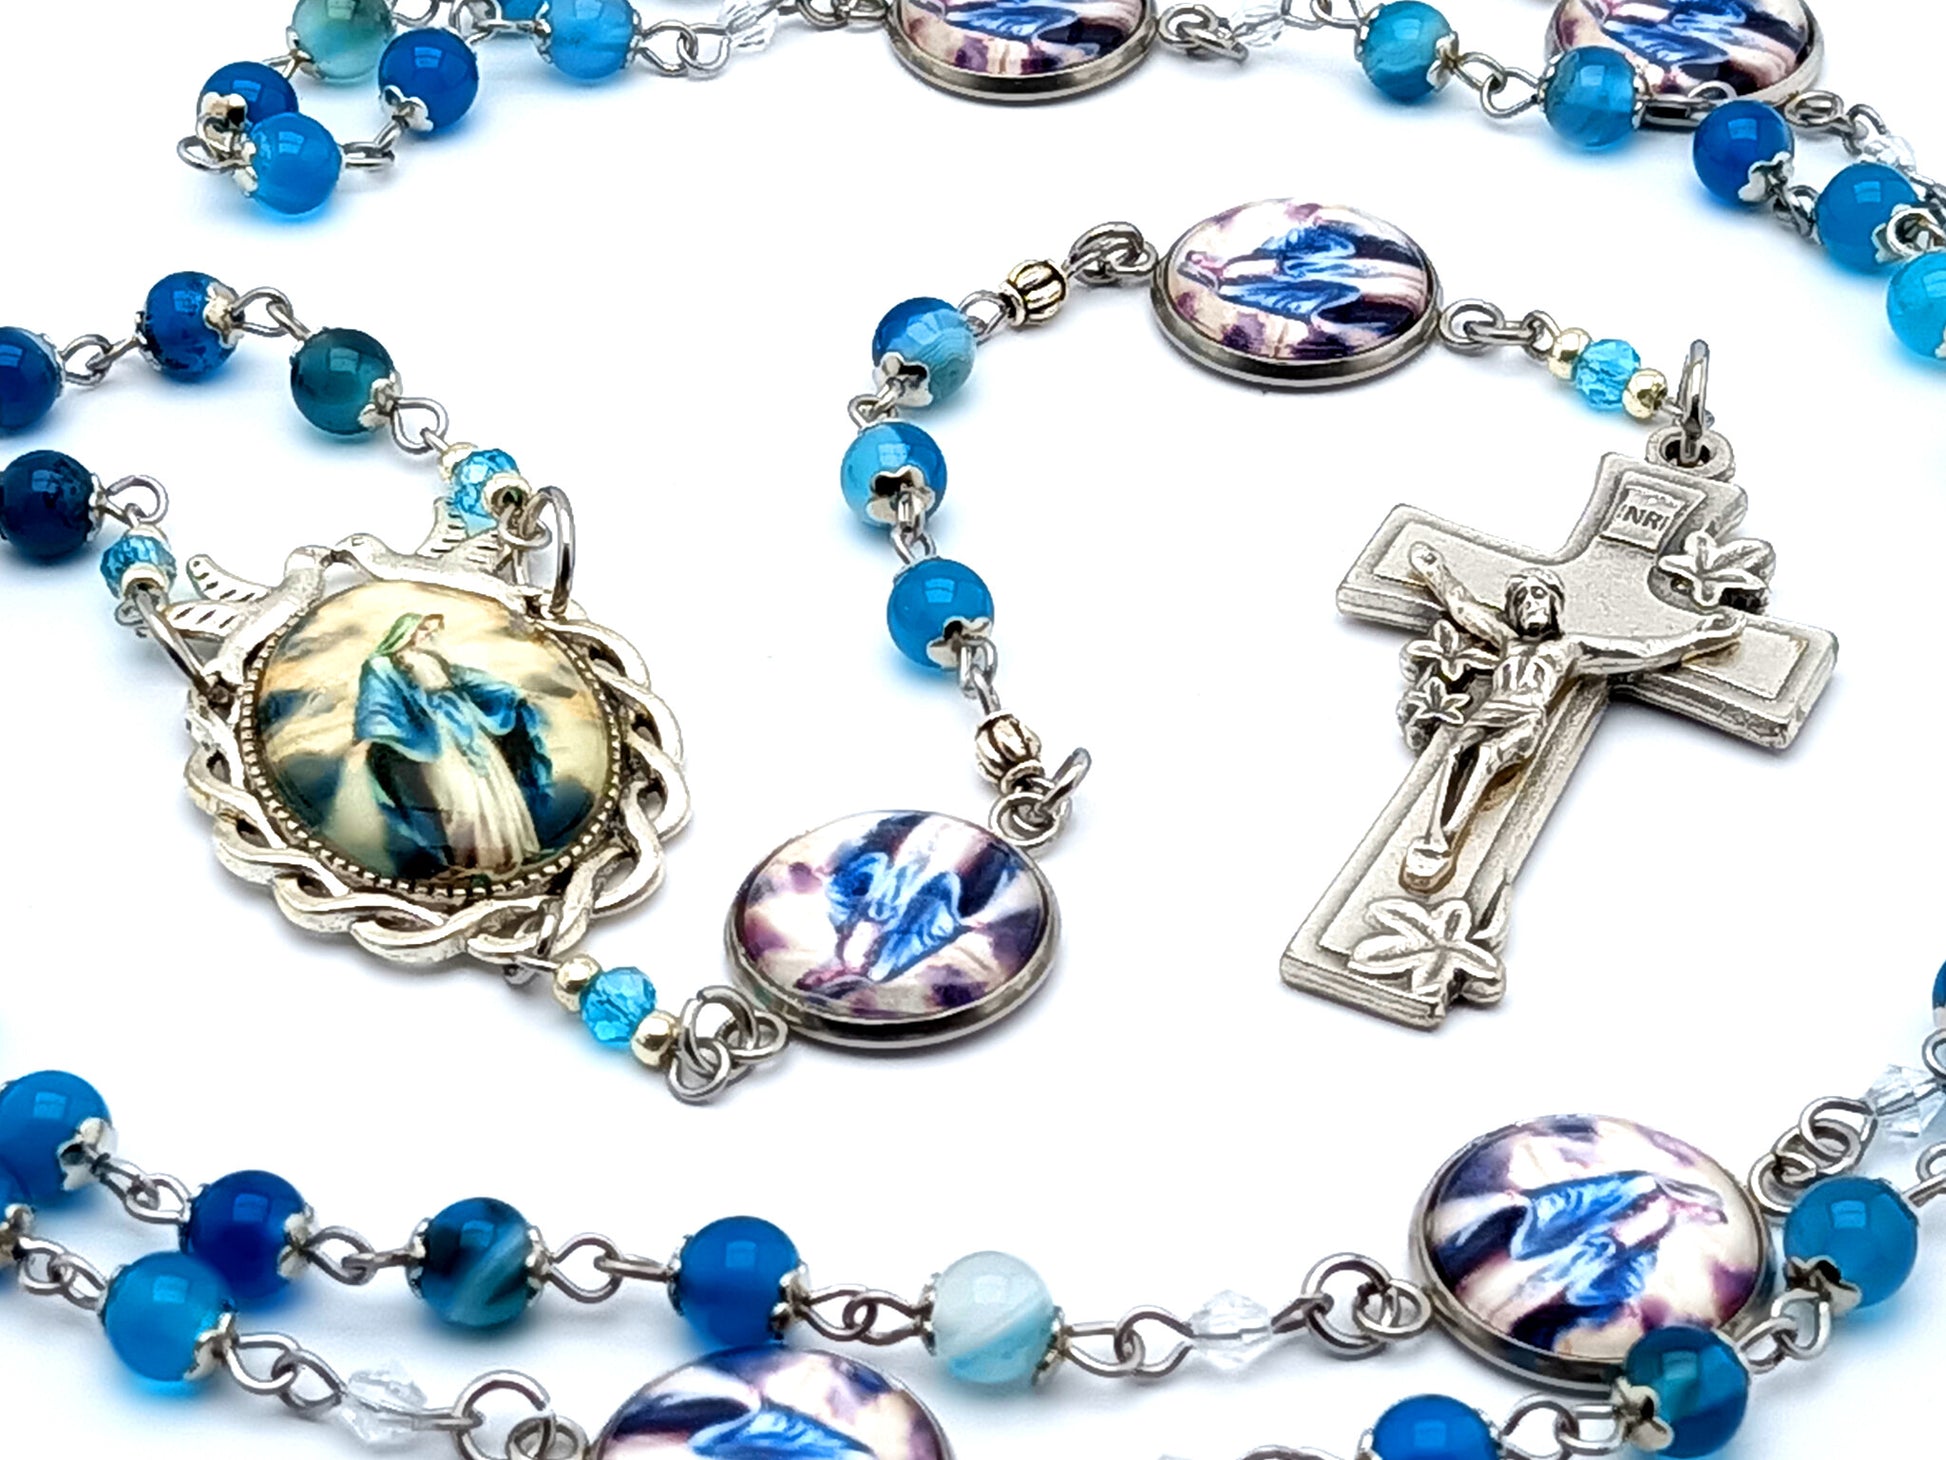 Our Lady of Grace unique rosary beads with agate gemstone  beads and Holy Spirit picture medal and lily of the valley crucifix.